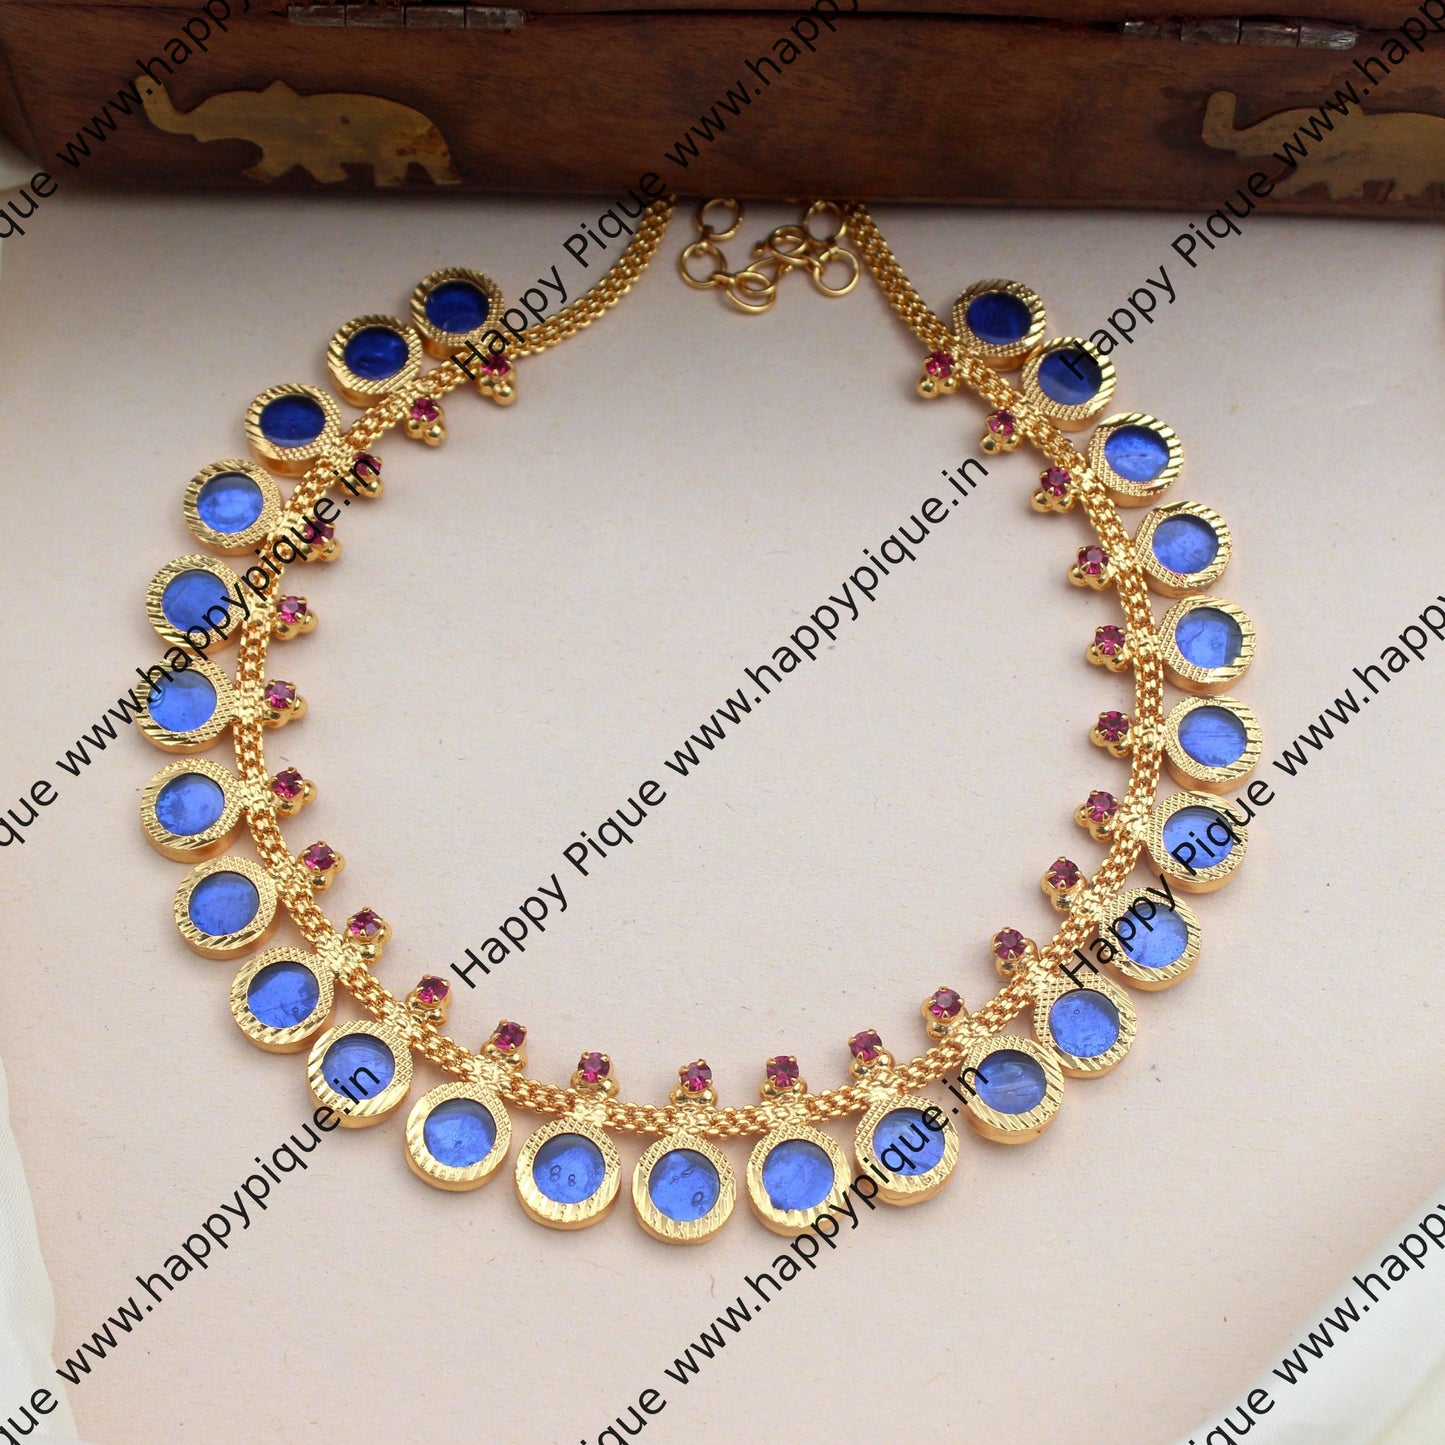 Real Gold Tone Traditional Kerala AD Round Necklace - Blue